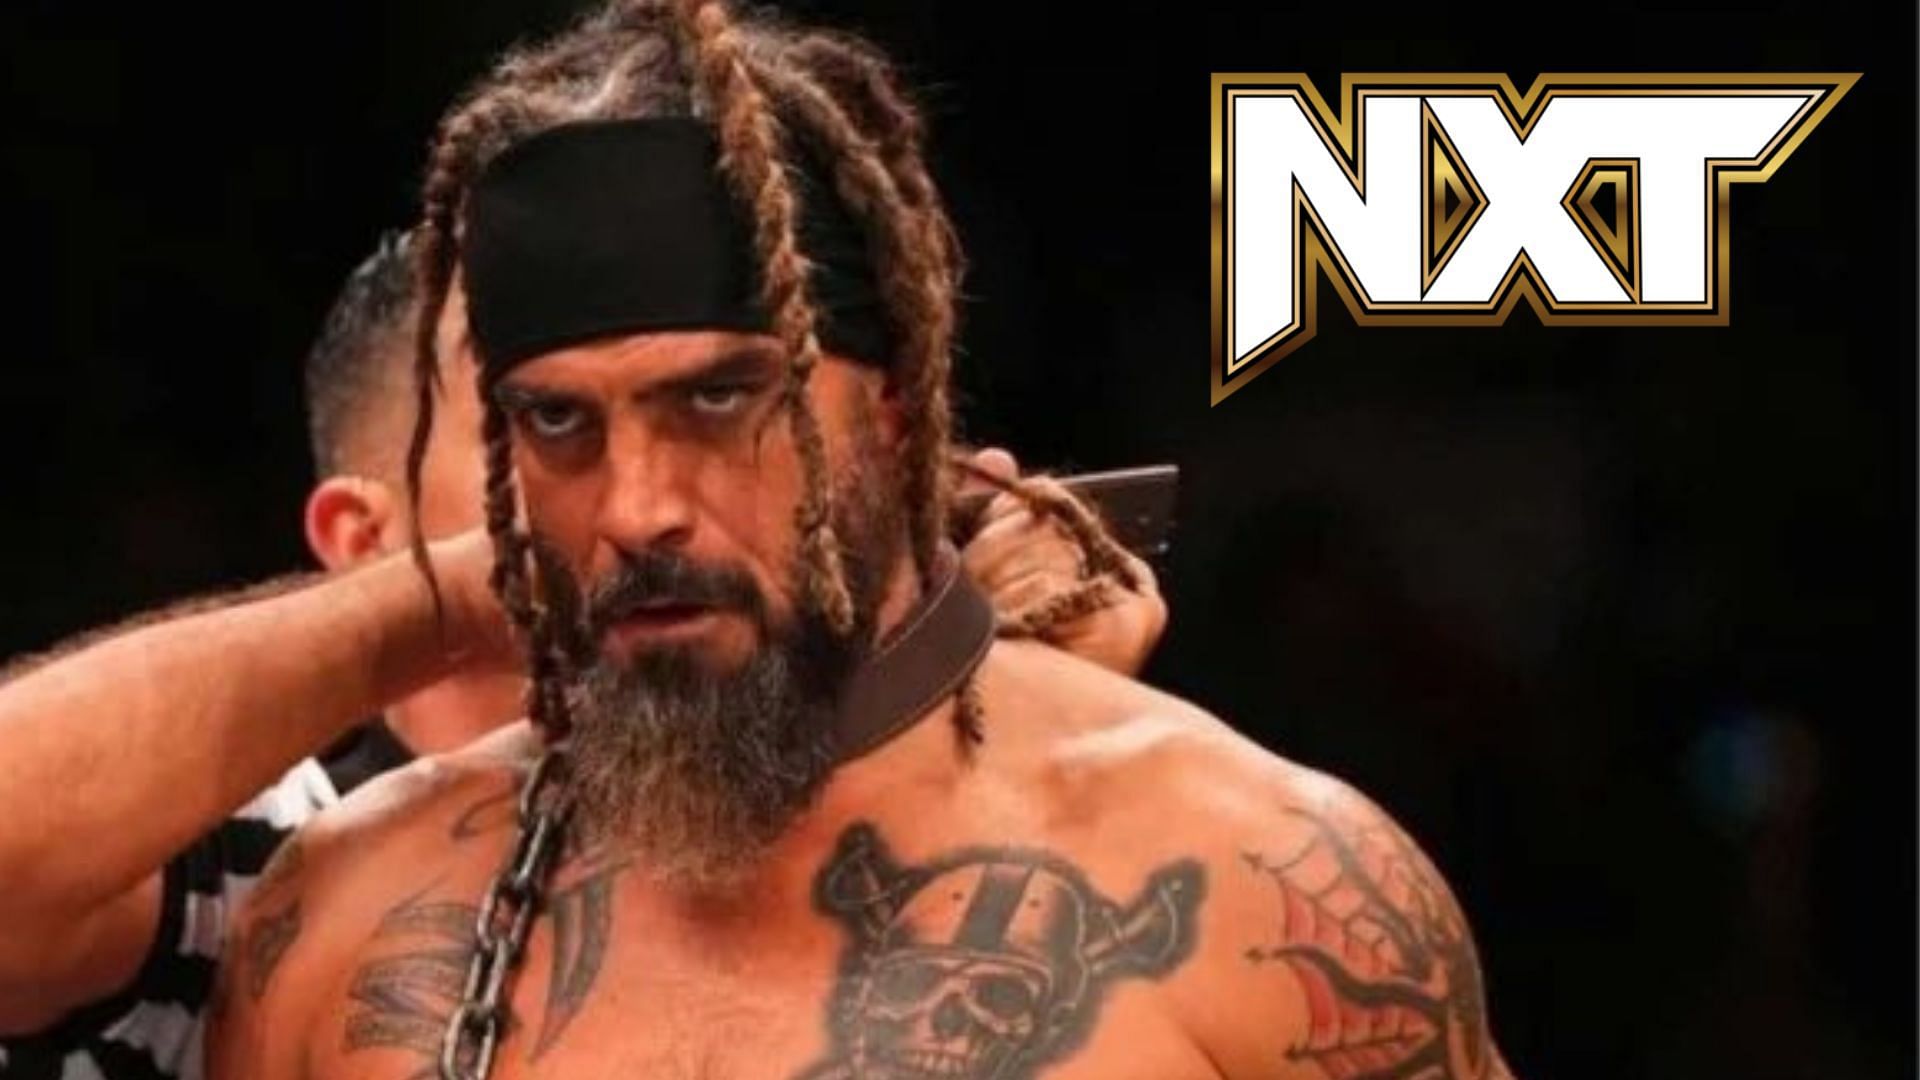 Jay Briscoe passed away following a fatal car accident